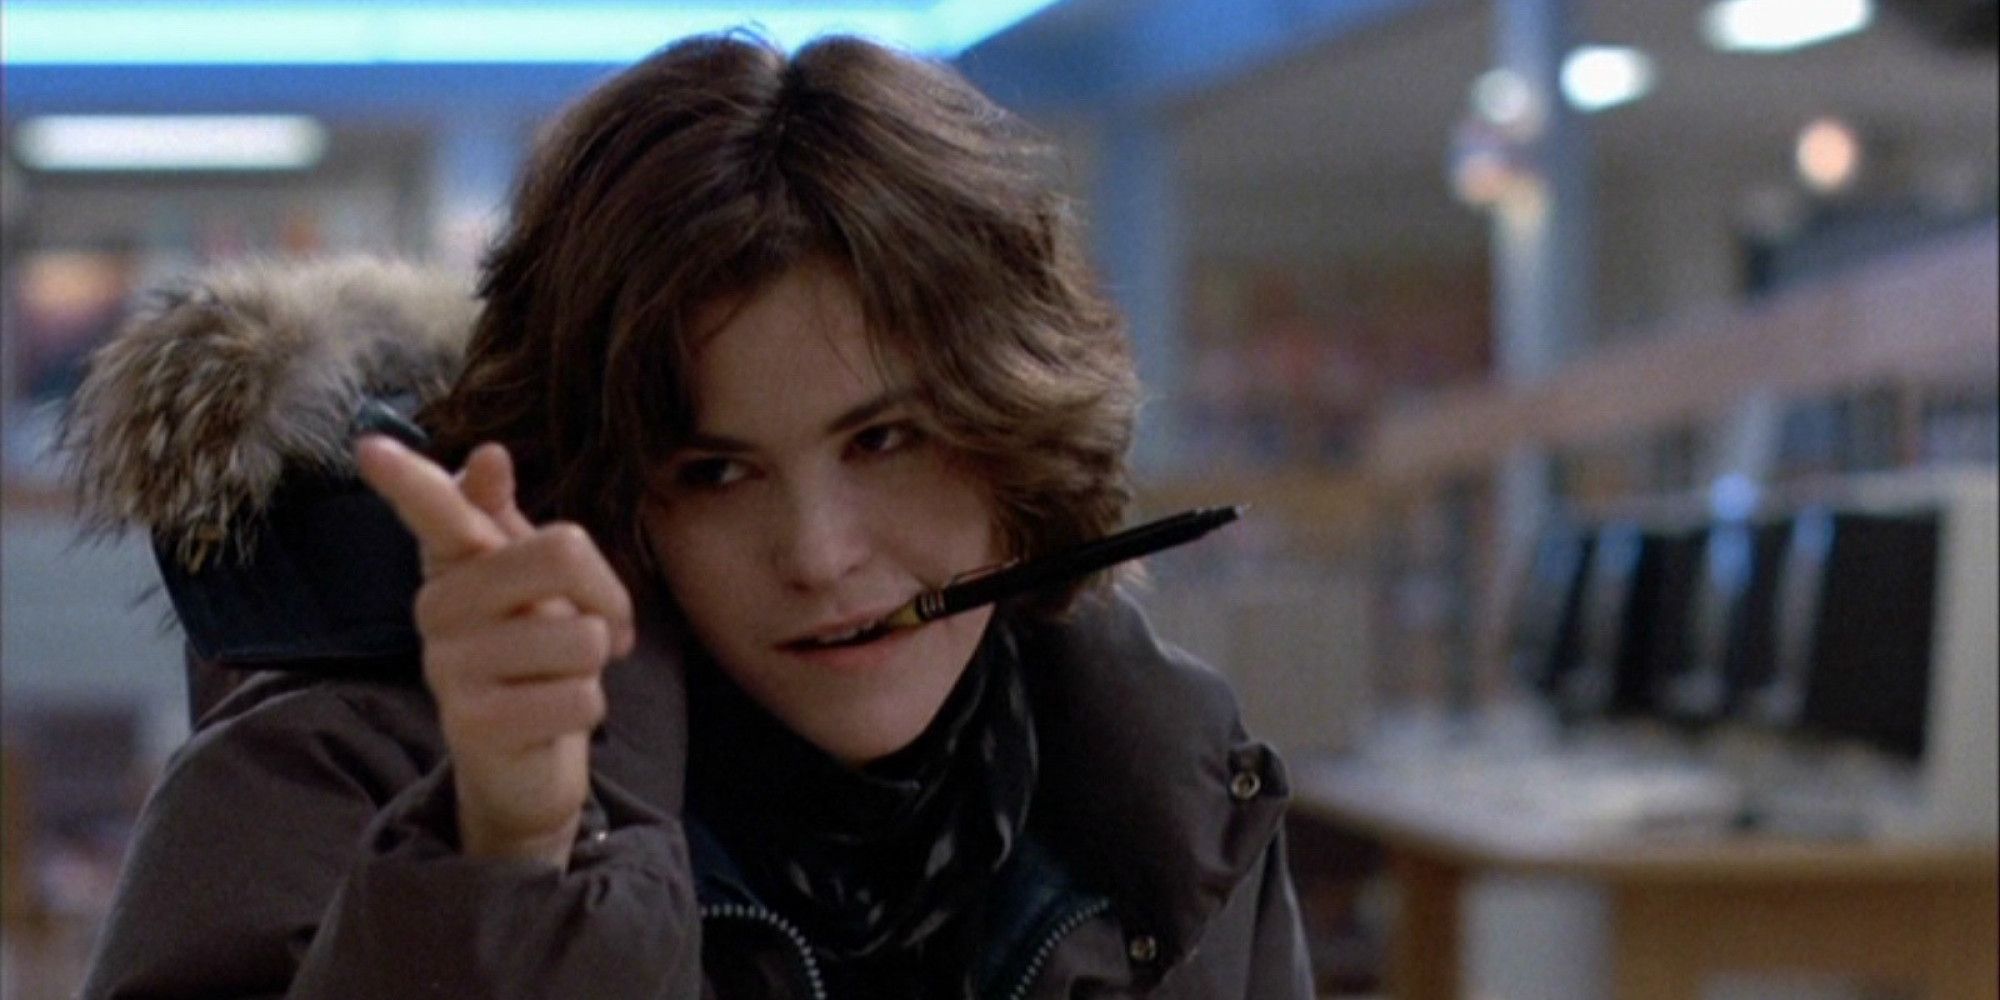 Ally Sheedy chews on a pen and points in The Breakfast Club.